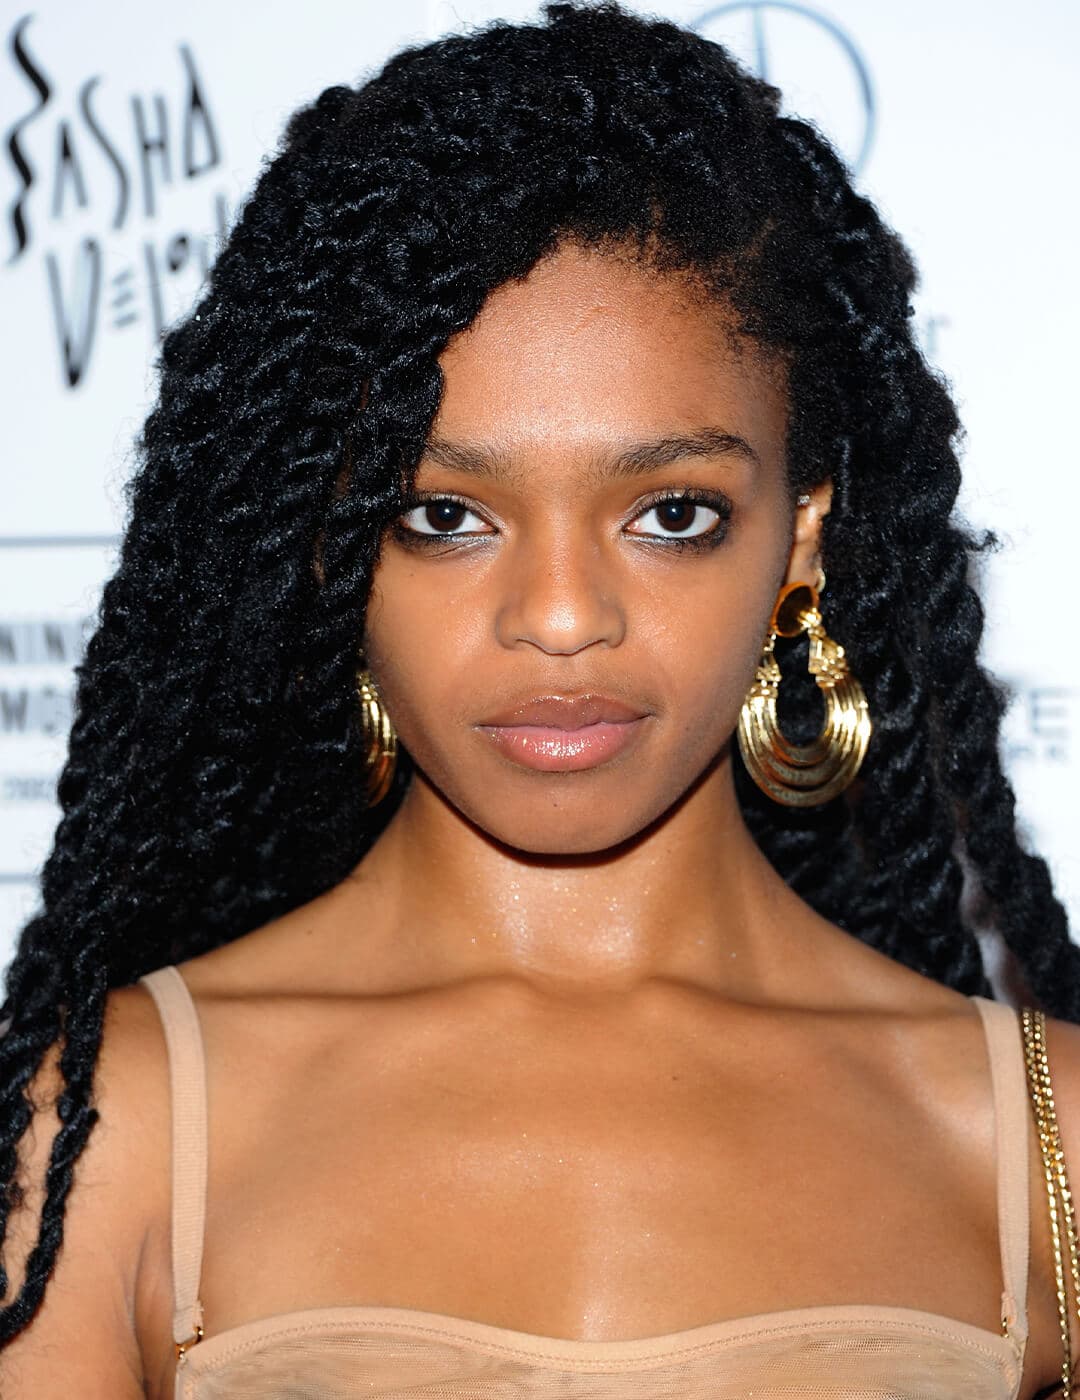 Close-up of model Selah Marley rocking a braided hairstyle